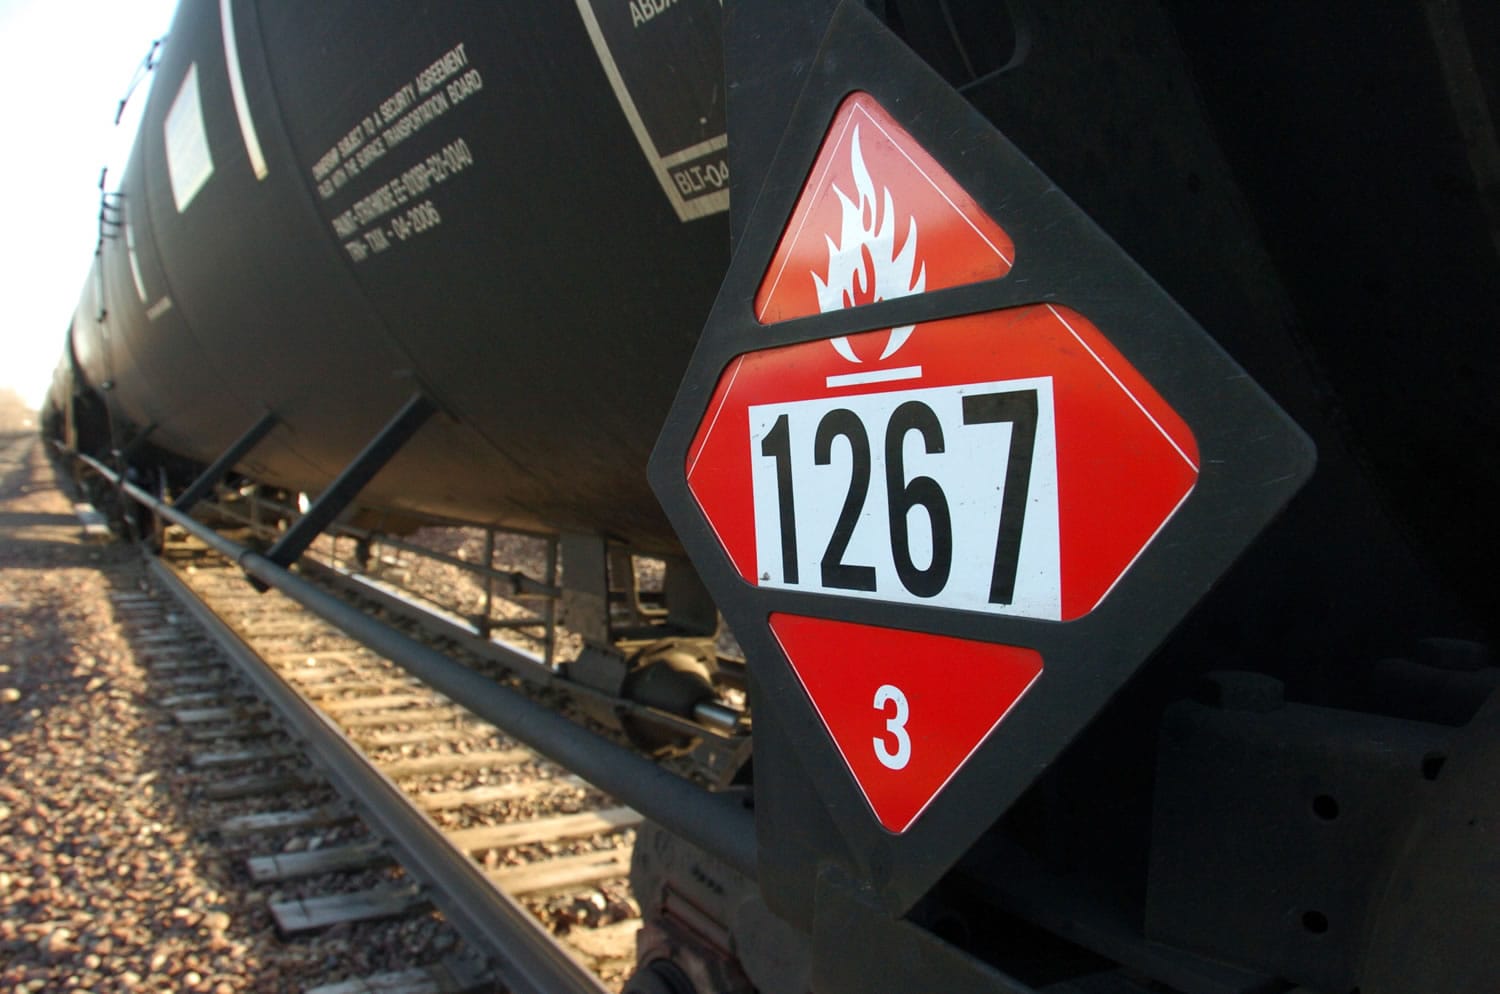 A warning placard is attached to a train tank car carrying crude oil near a loading terminal in Trenton, N.D.